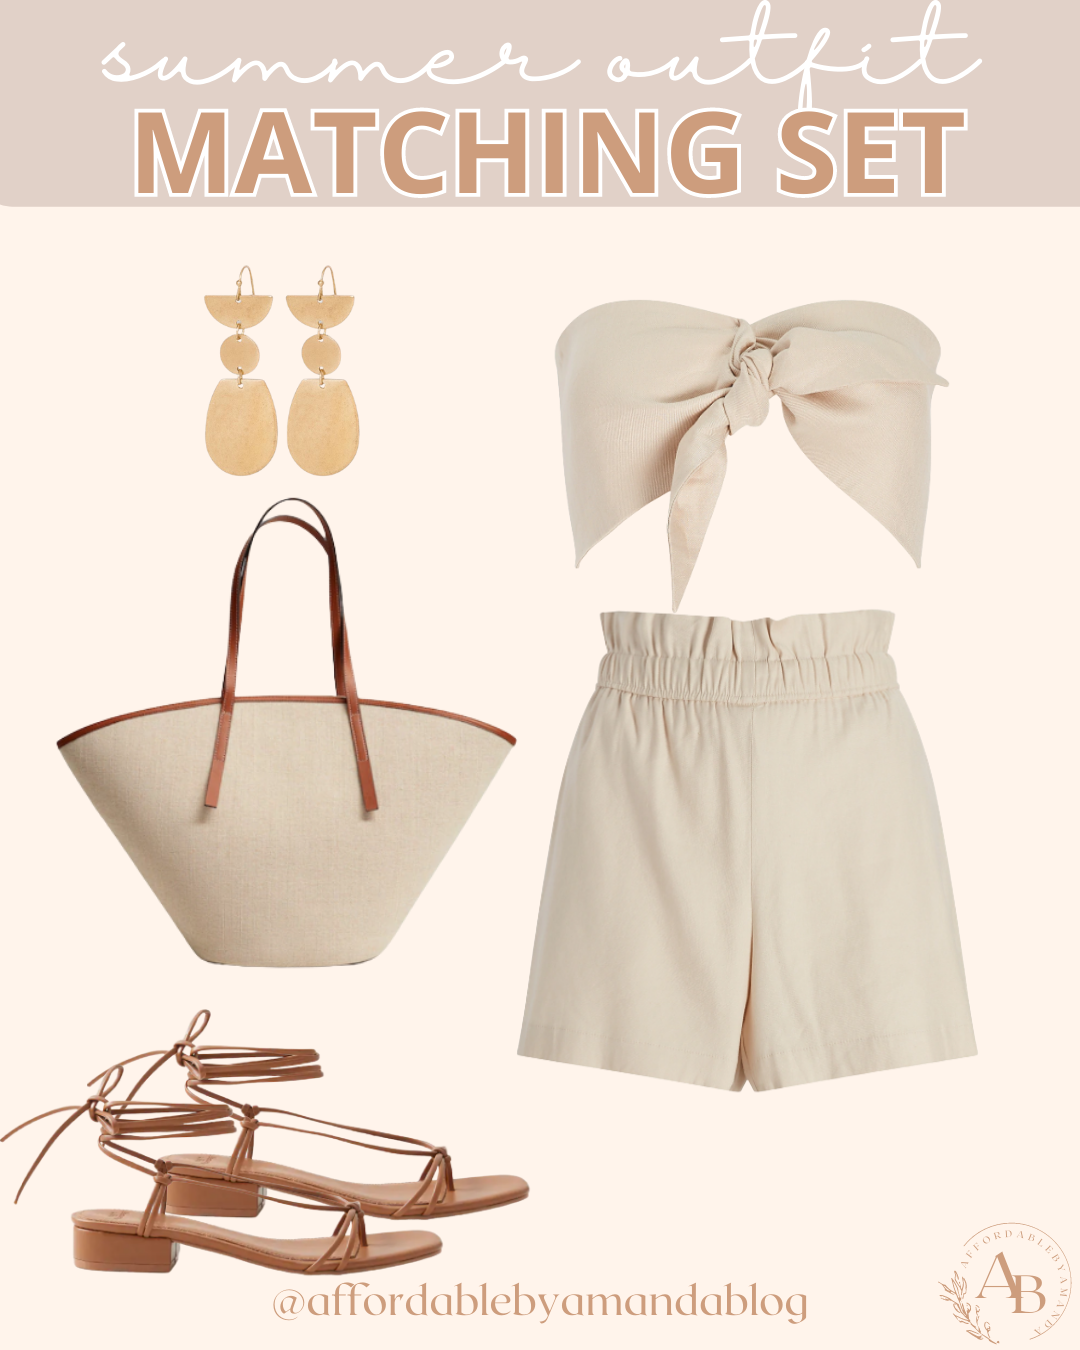 Matching Two-Piece Outfits & Sets You Need for Summer - Matching Sets: Two-Piece Outfits For Women This Summer - Affordable by Amanda